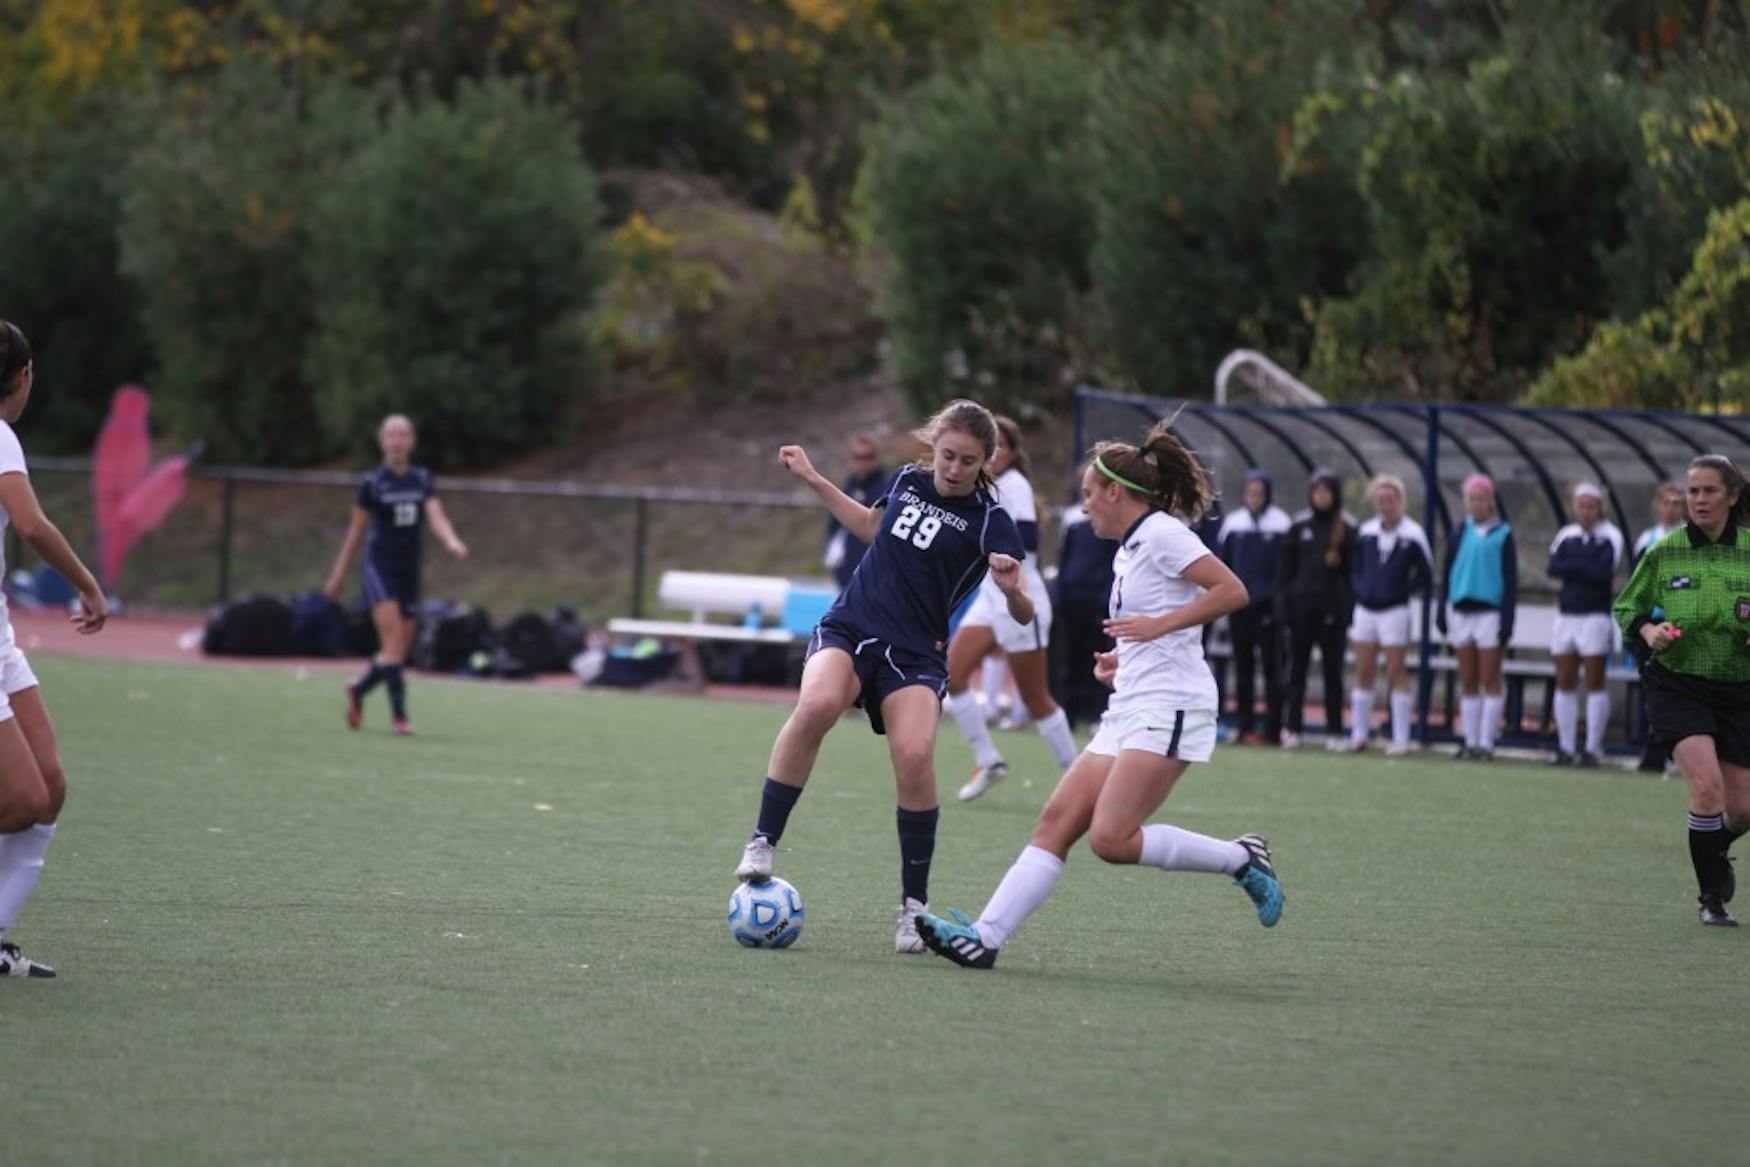 ON THE BALL: Forward Lea McDaniel ’17 dribbles around an Emory University defender in the team’s 1-1 tie on Oct. 19 at home.